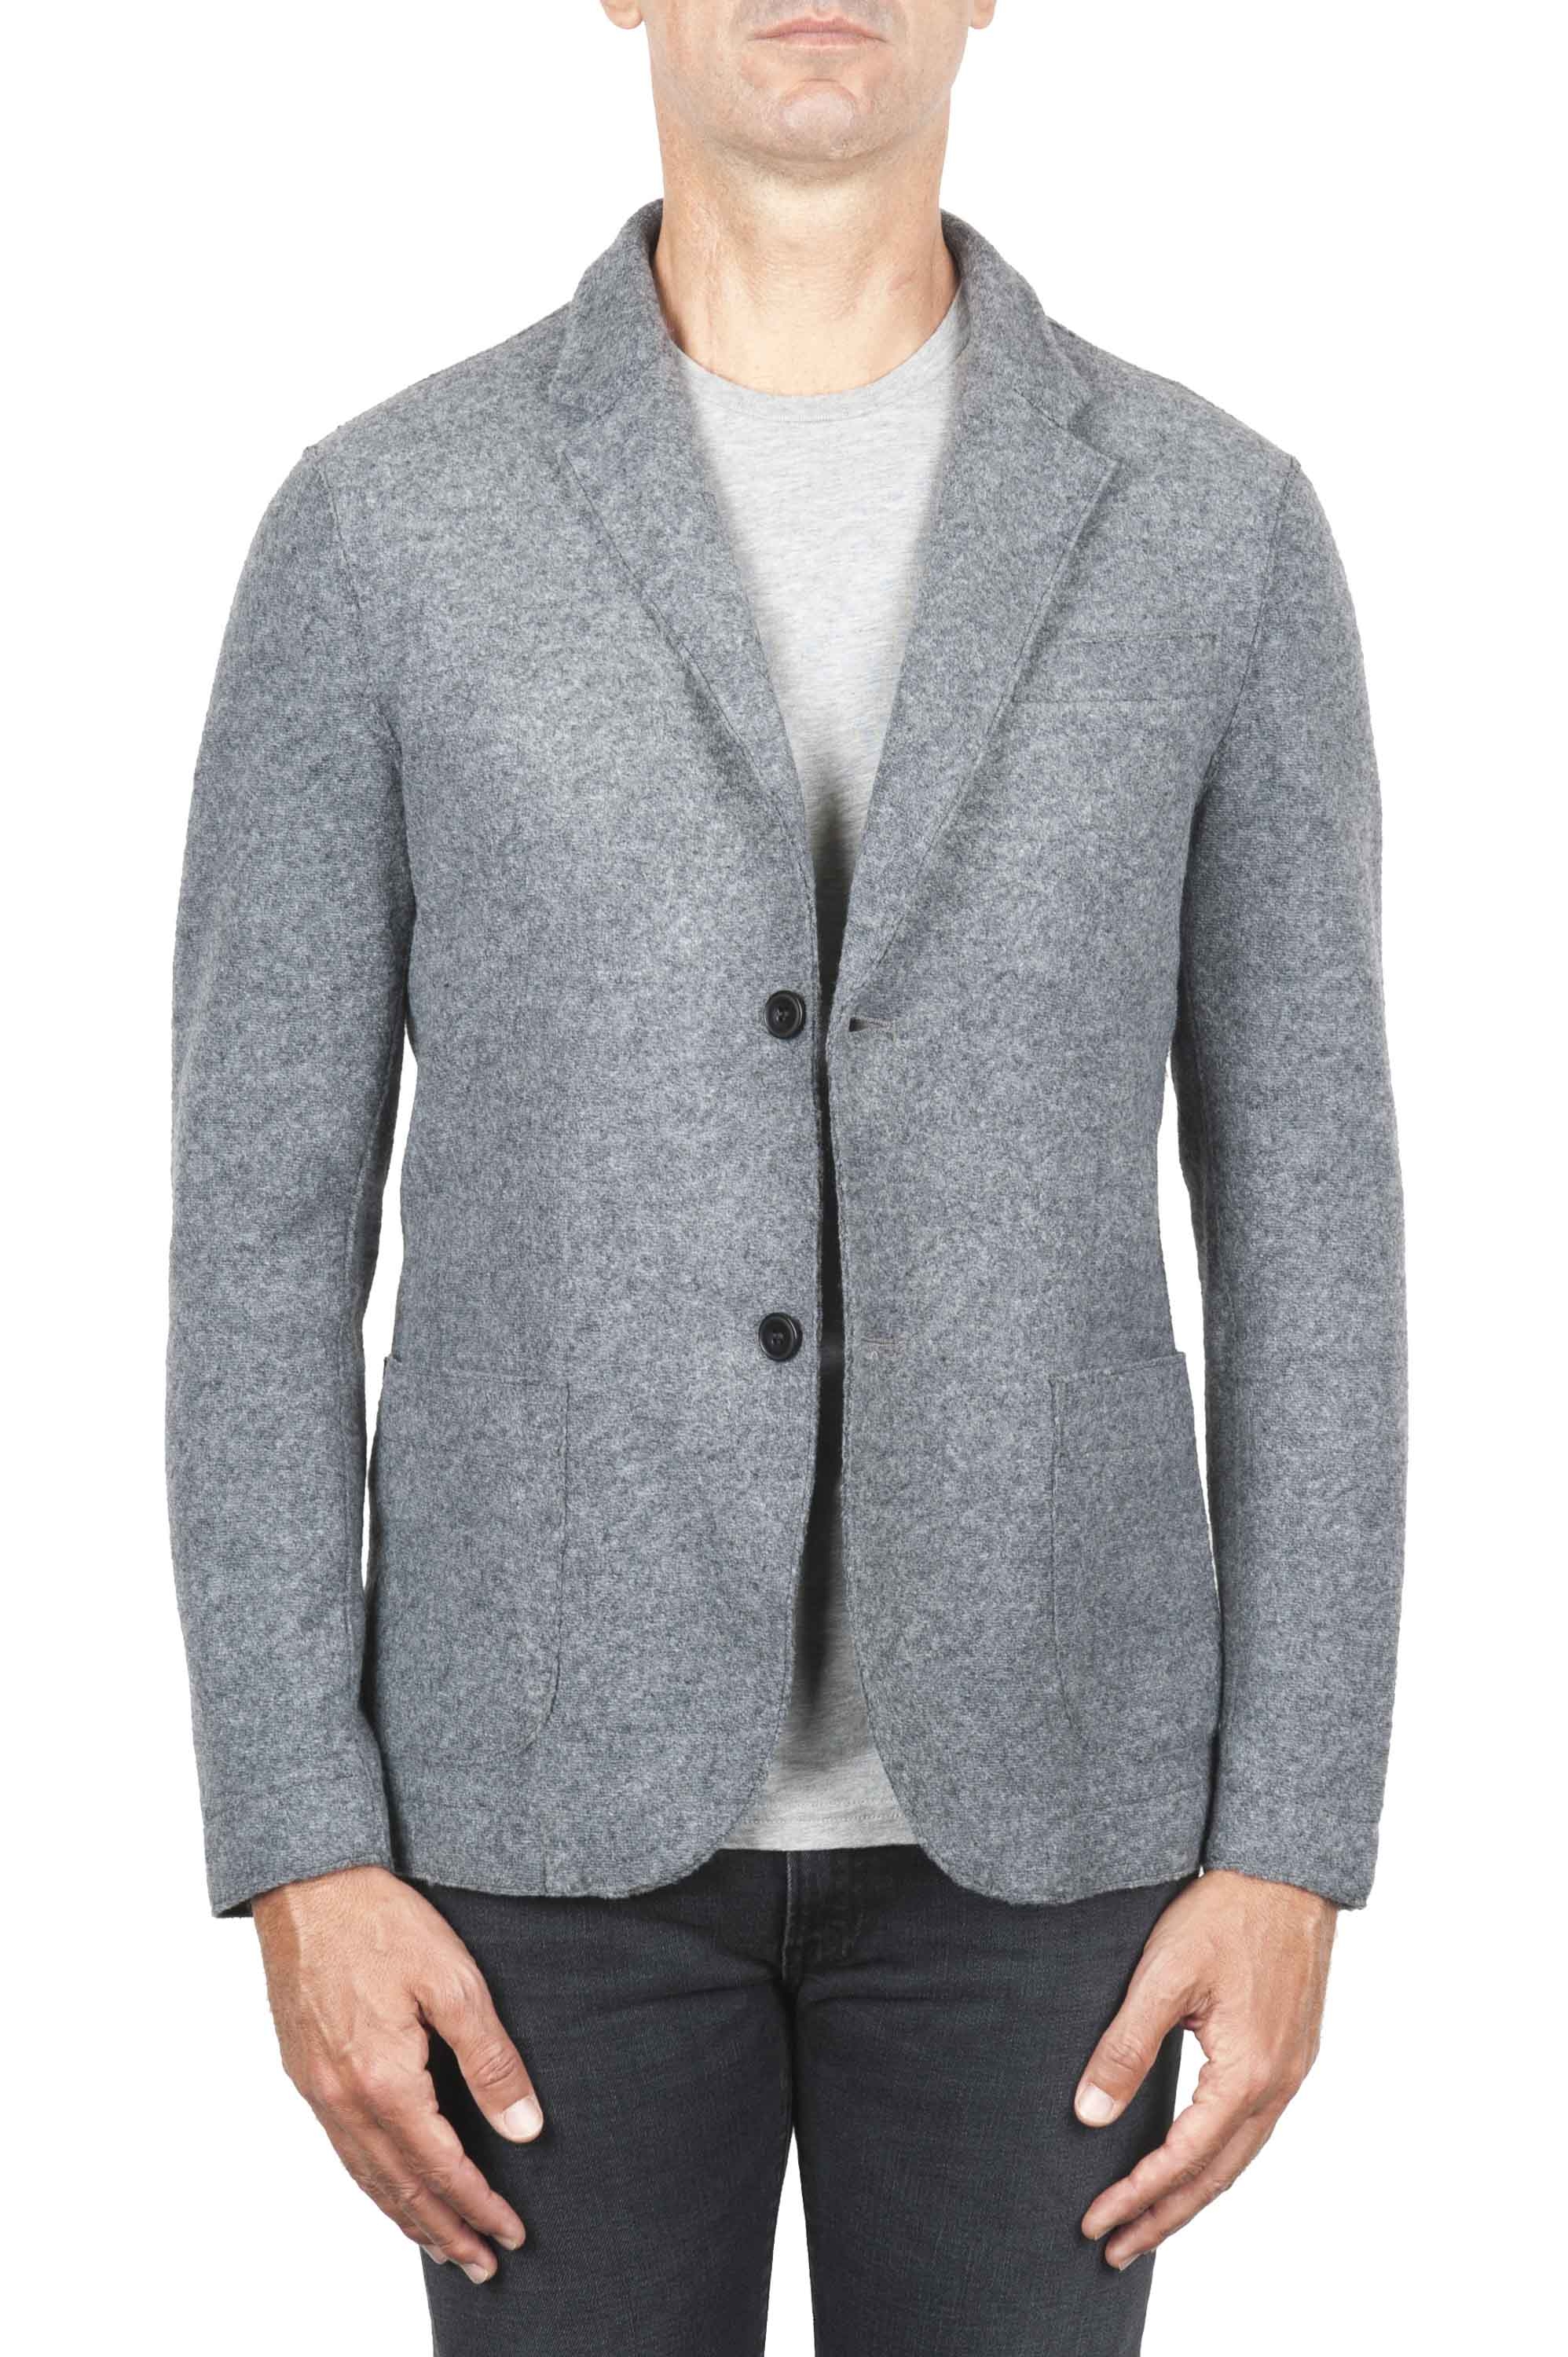 SBU 01336 Wool blend sport jacket unconstructed and unlined 01